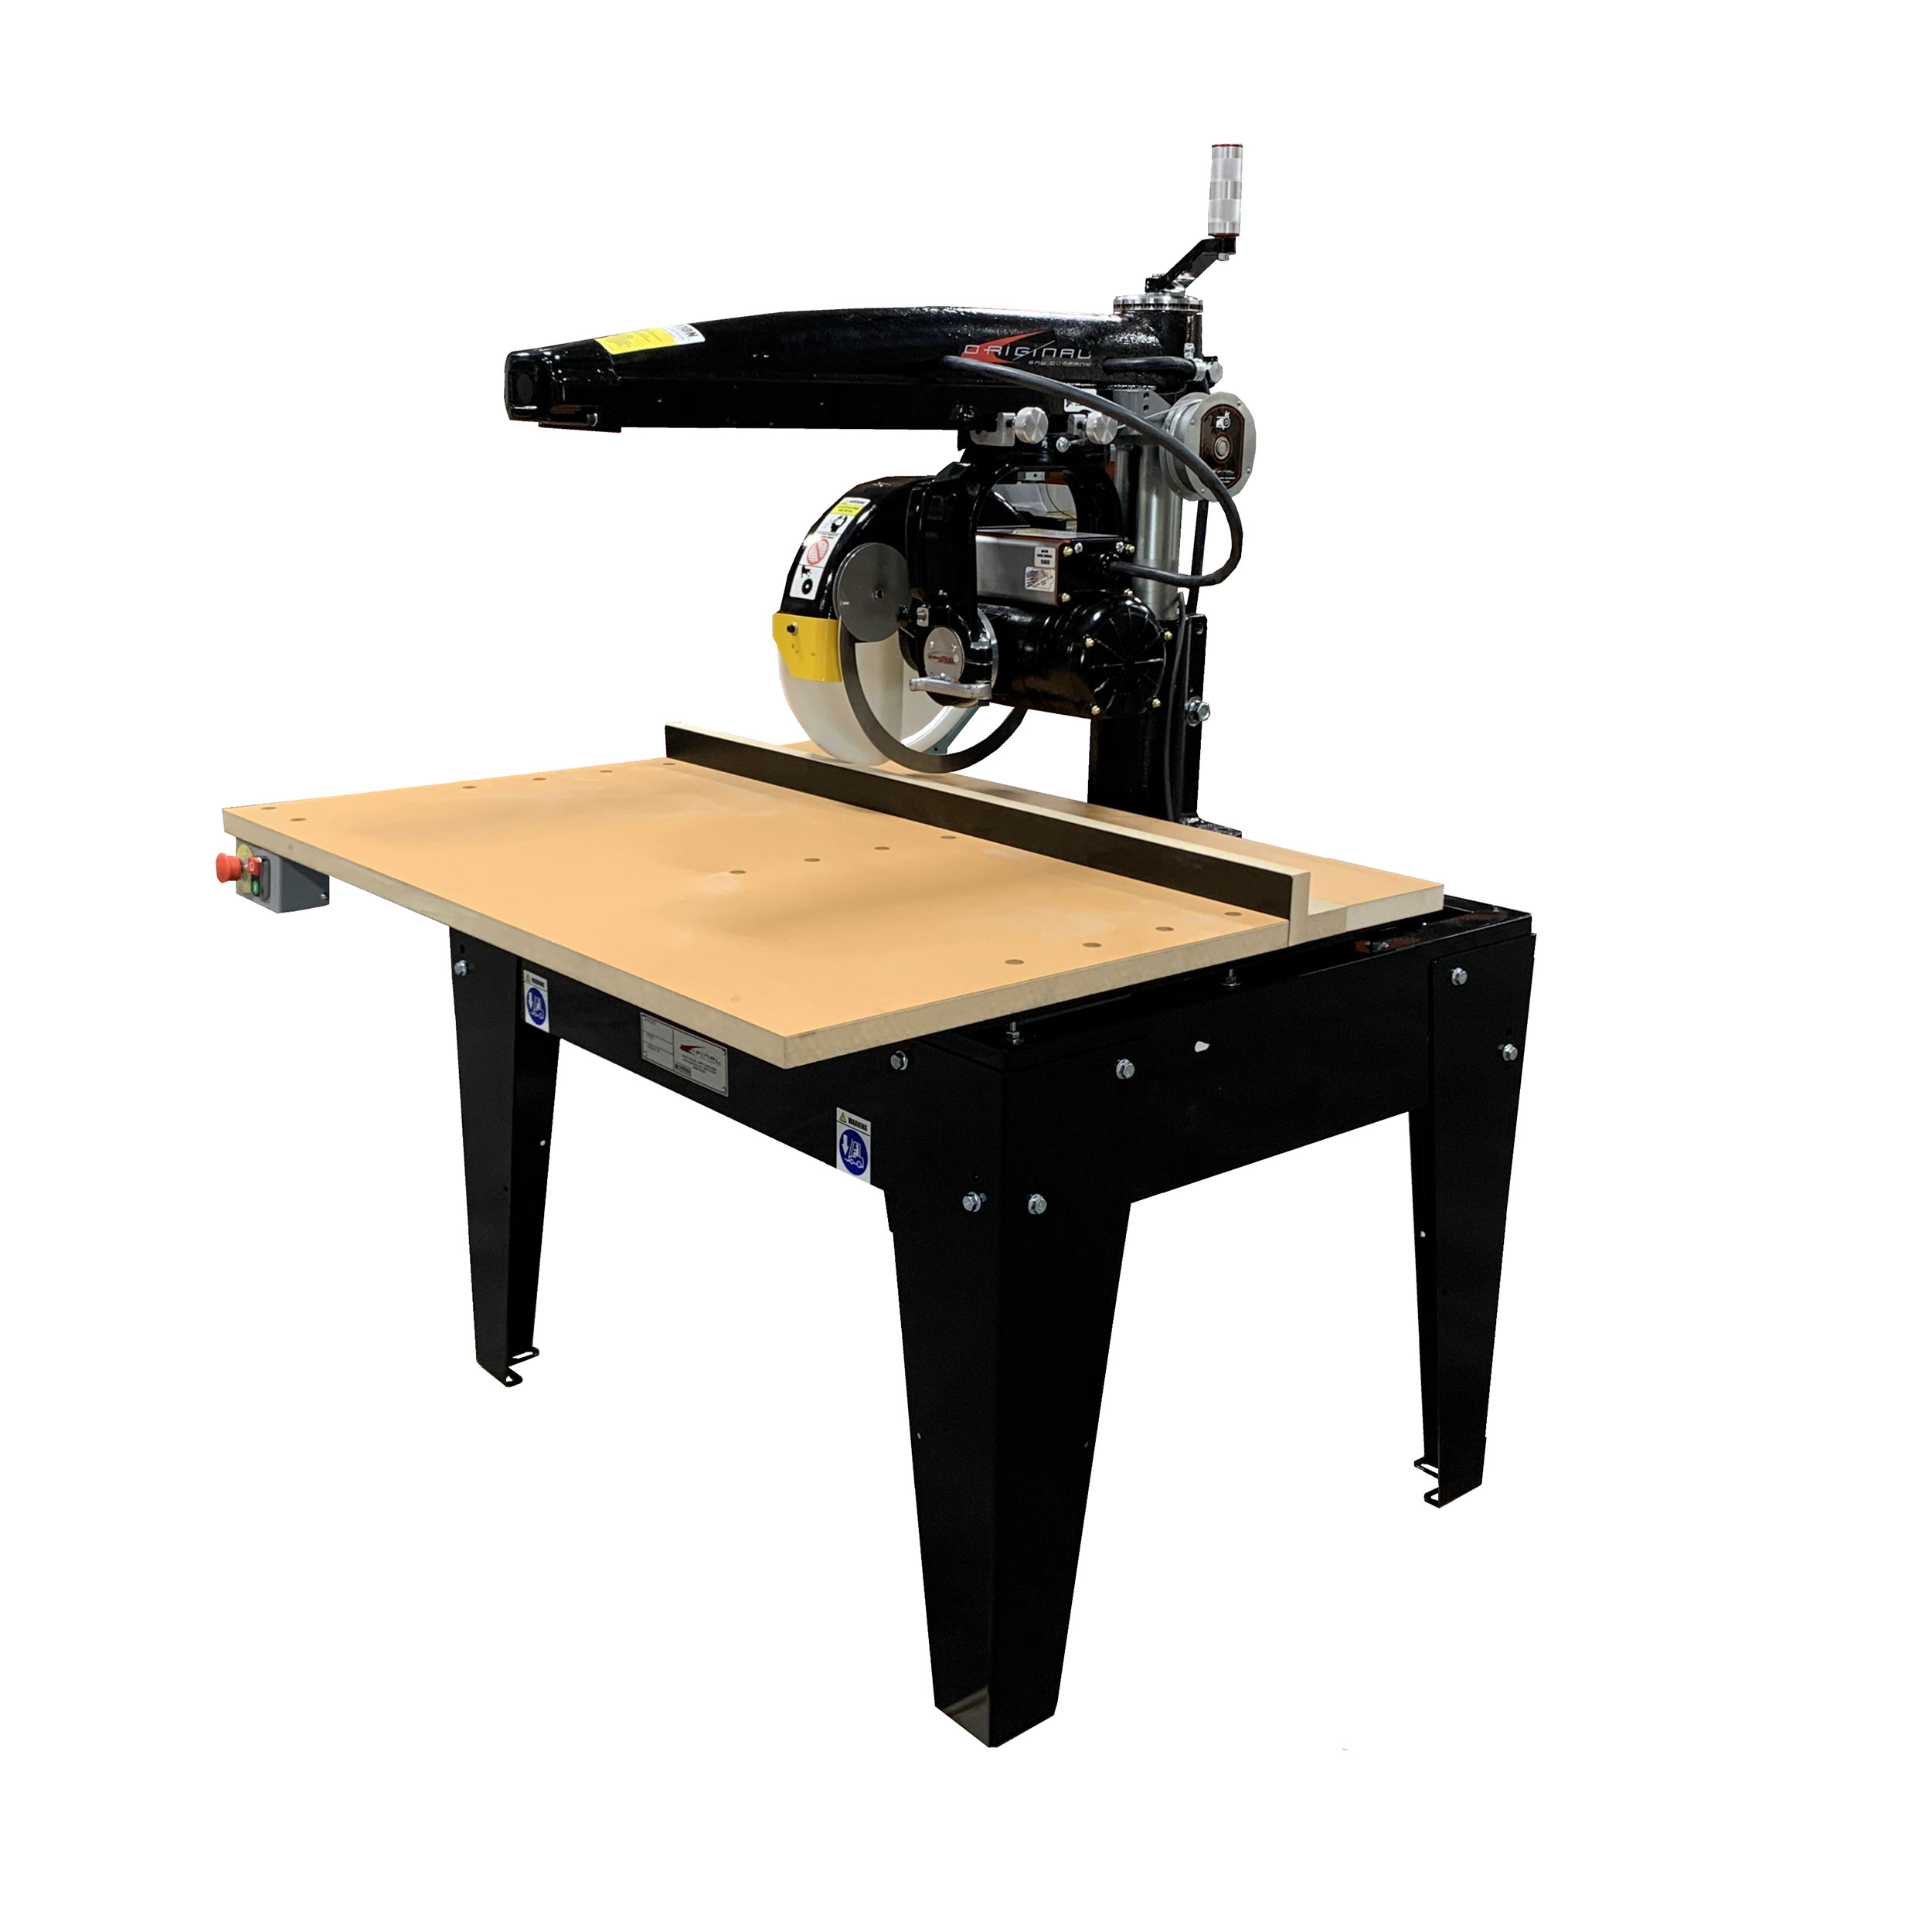 Radial Arm Saw With 14" Blade And 16" Crosscut, 3hp 1 Phase 208/230v